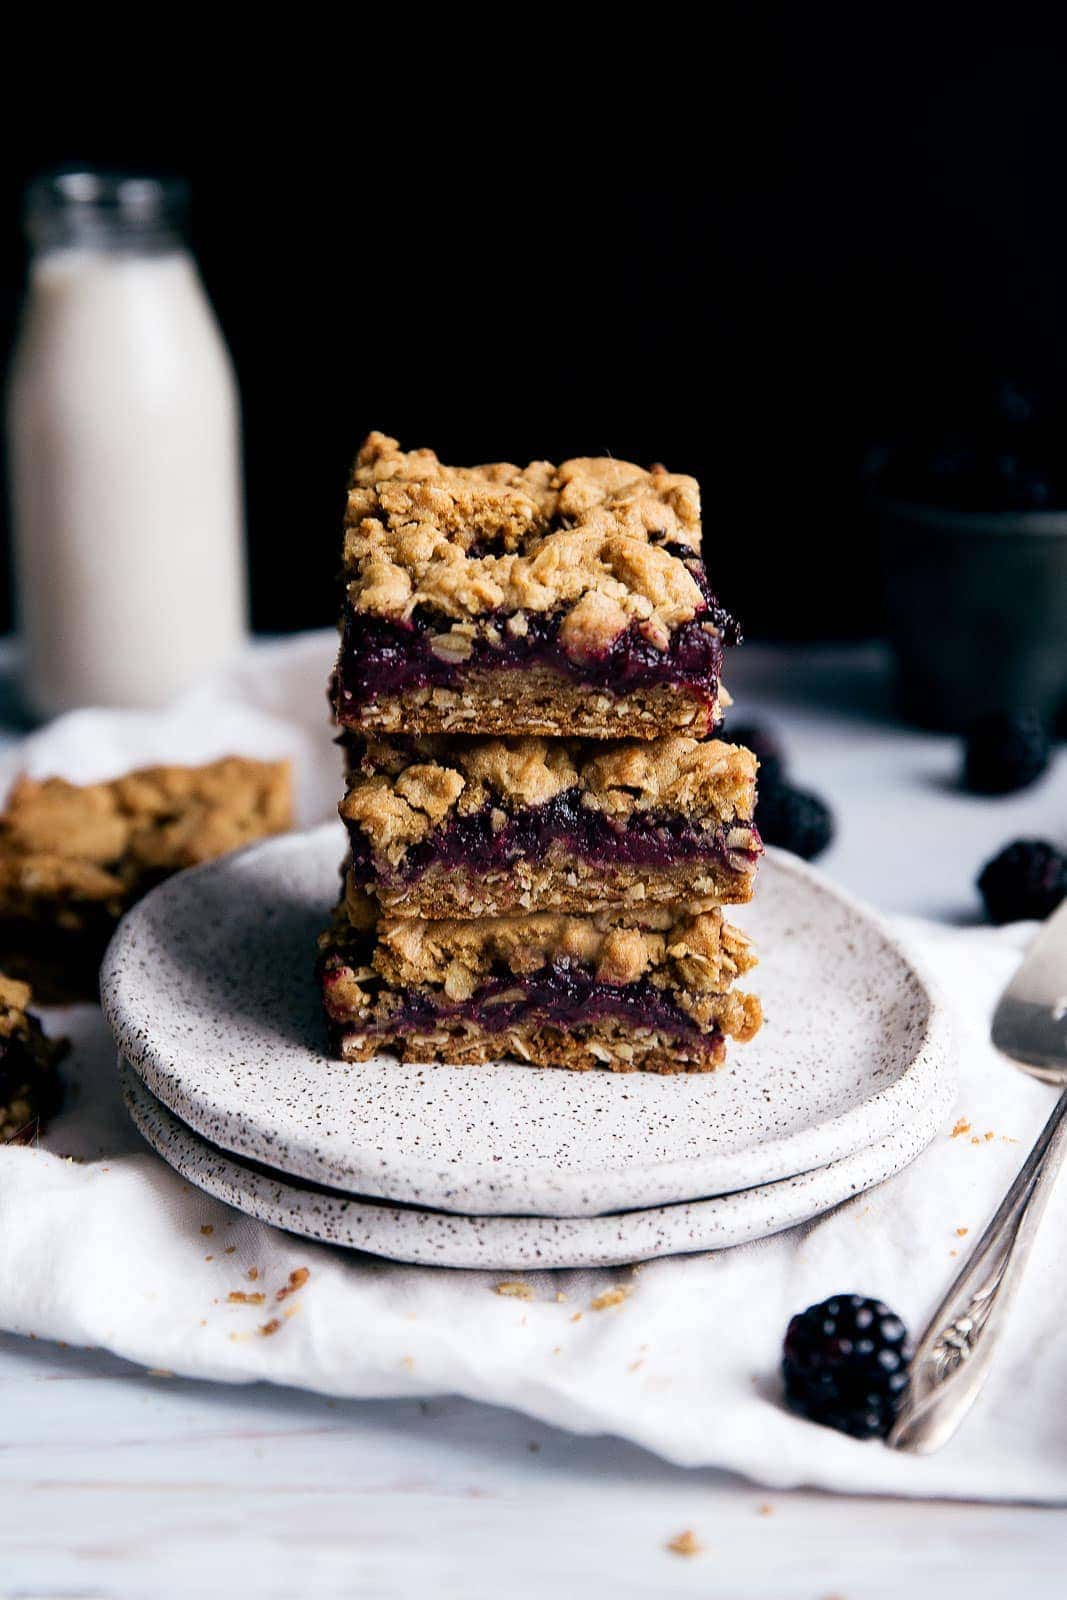 Chewy oatmeal bars with a homemade blackberry jam center and crumble topping